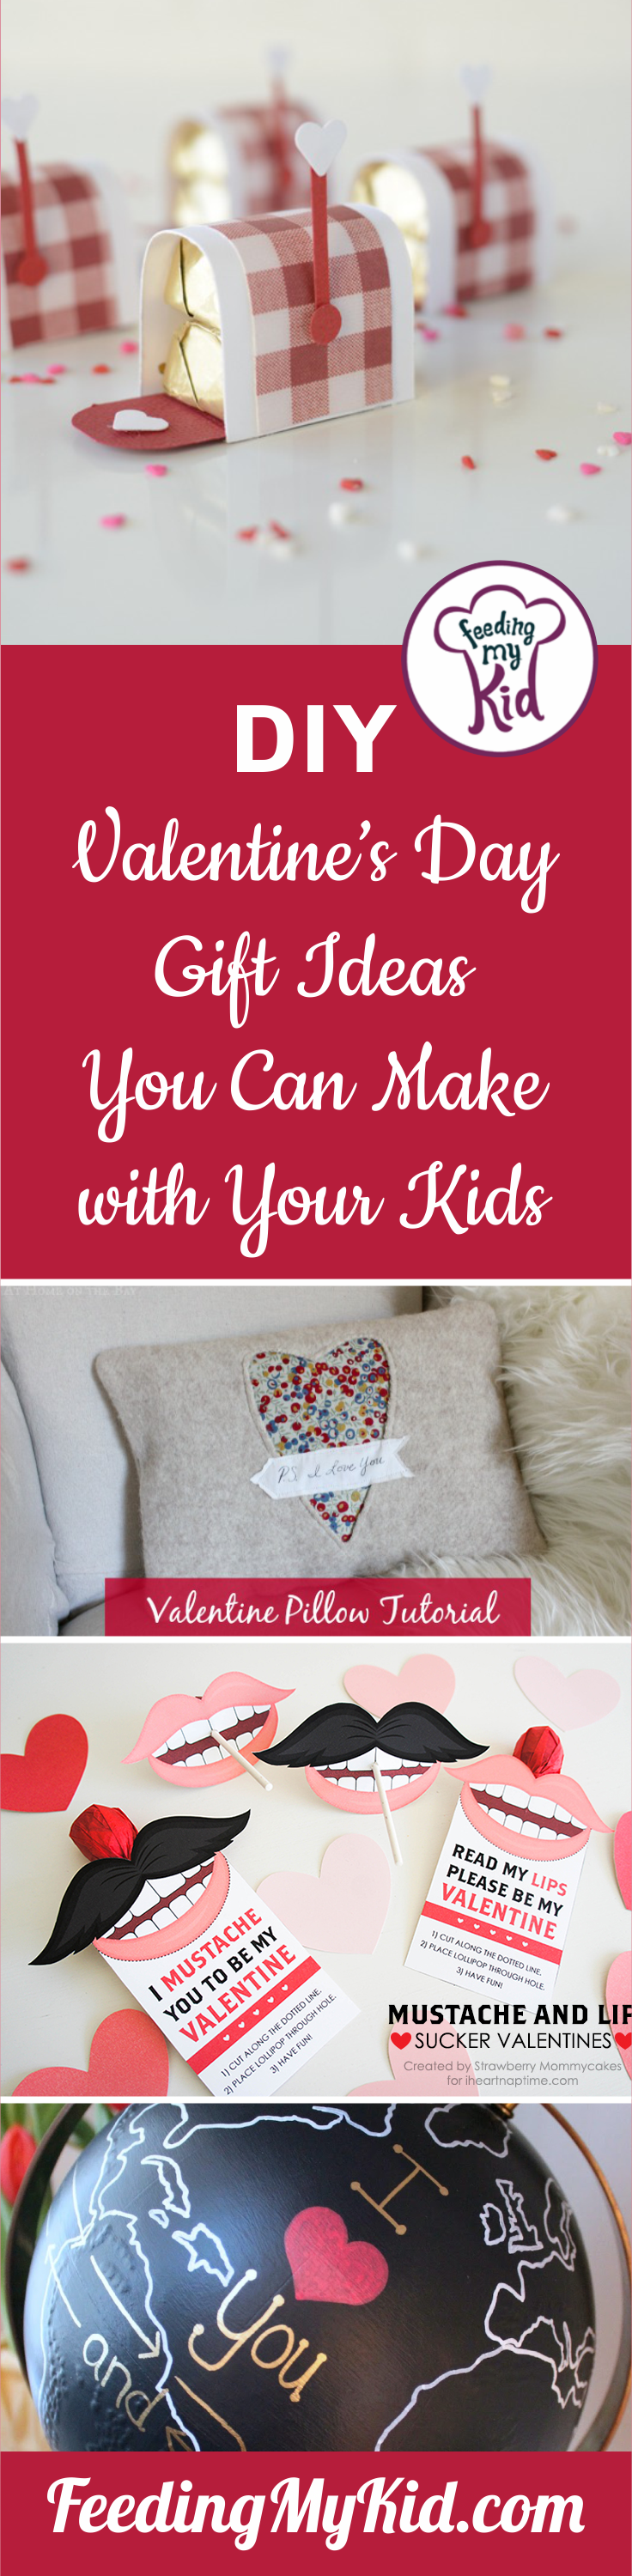 These Valentine's Day gift ideas are the perfect DIY gifts for your loved ones. Your kids will love creating these gifts with you.